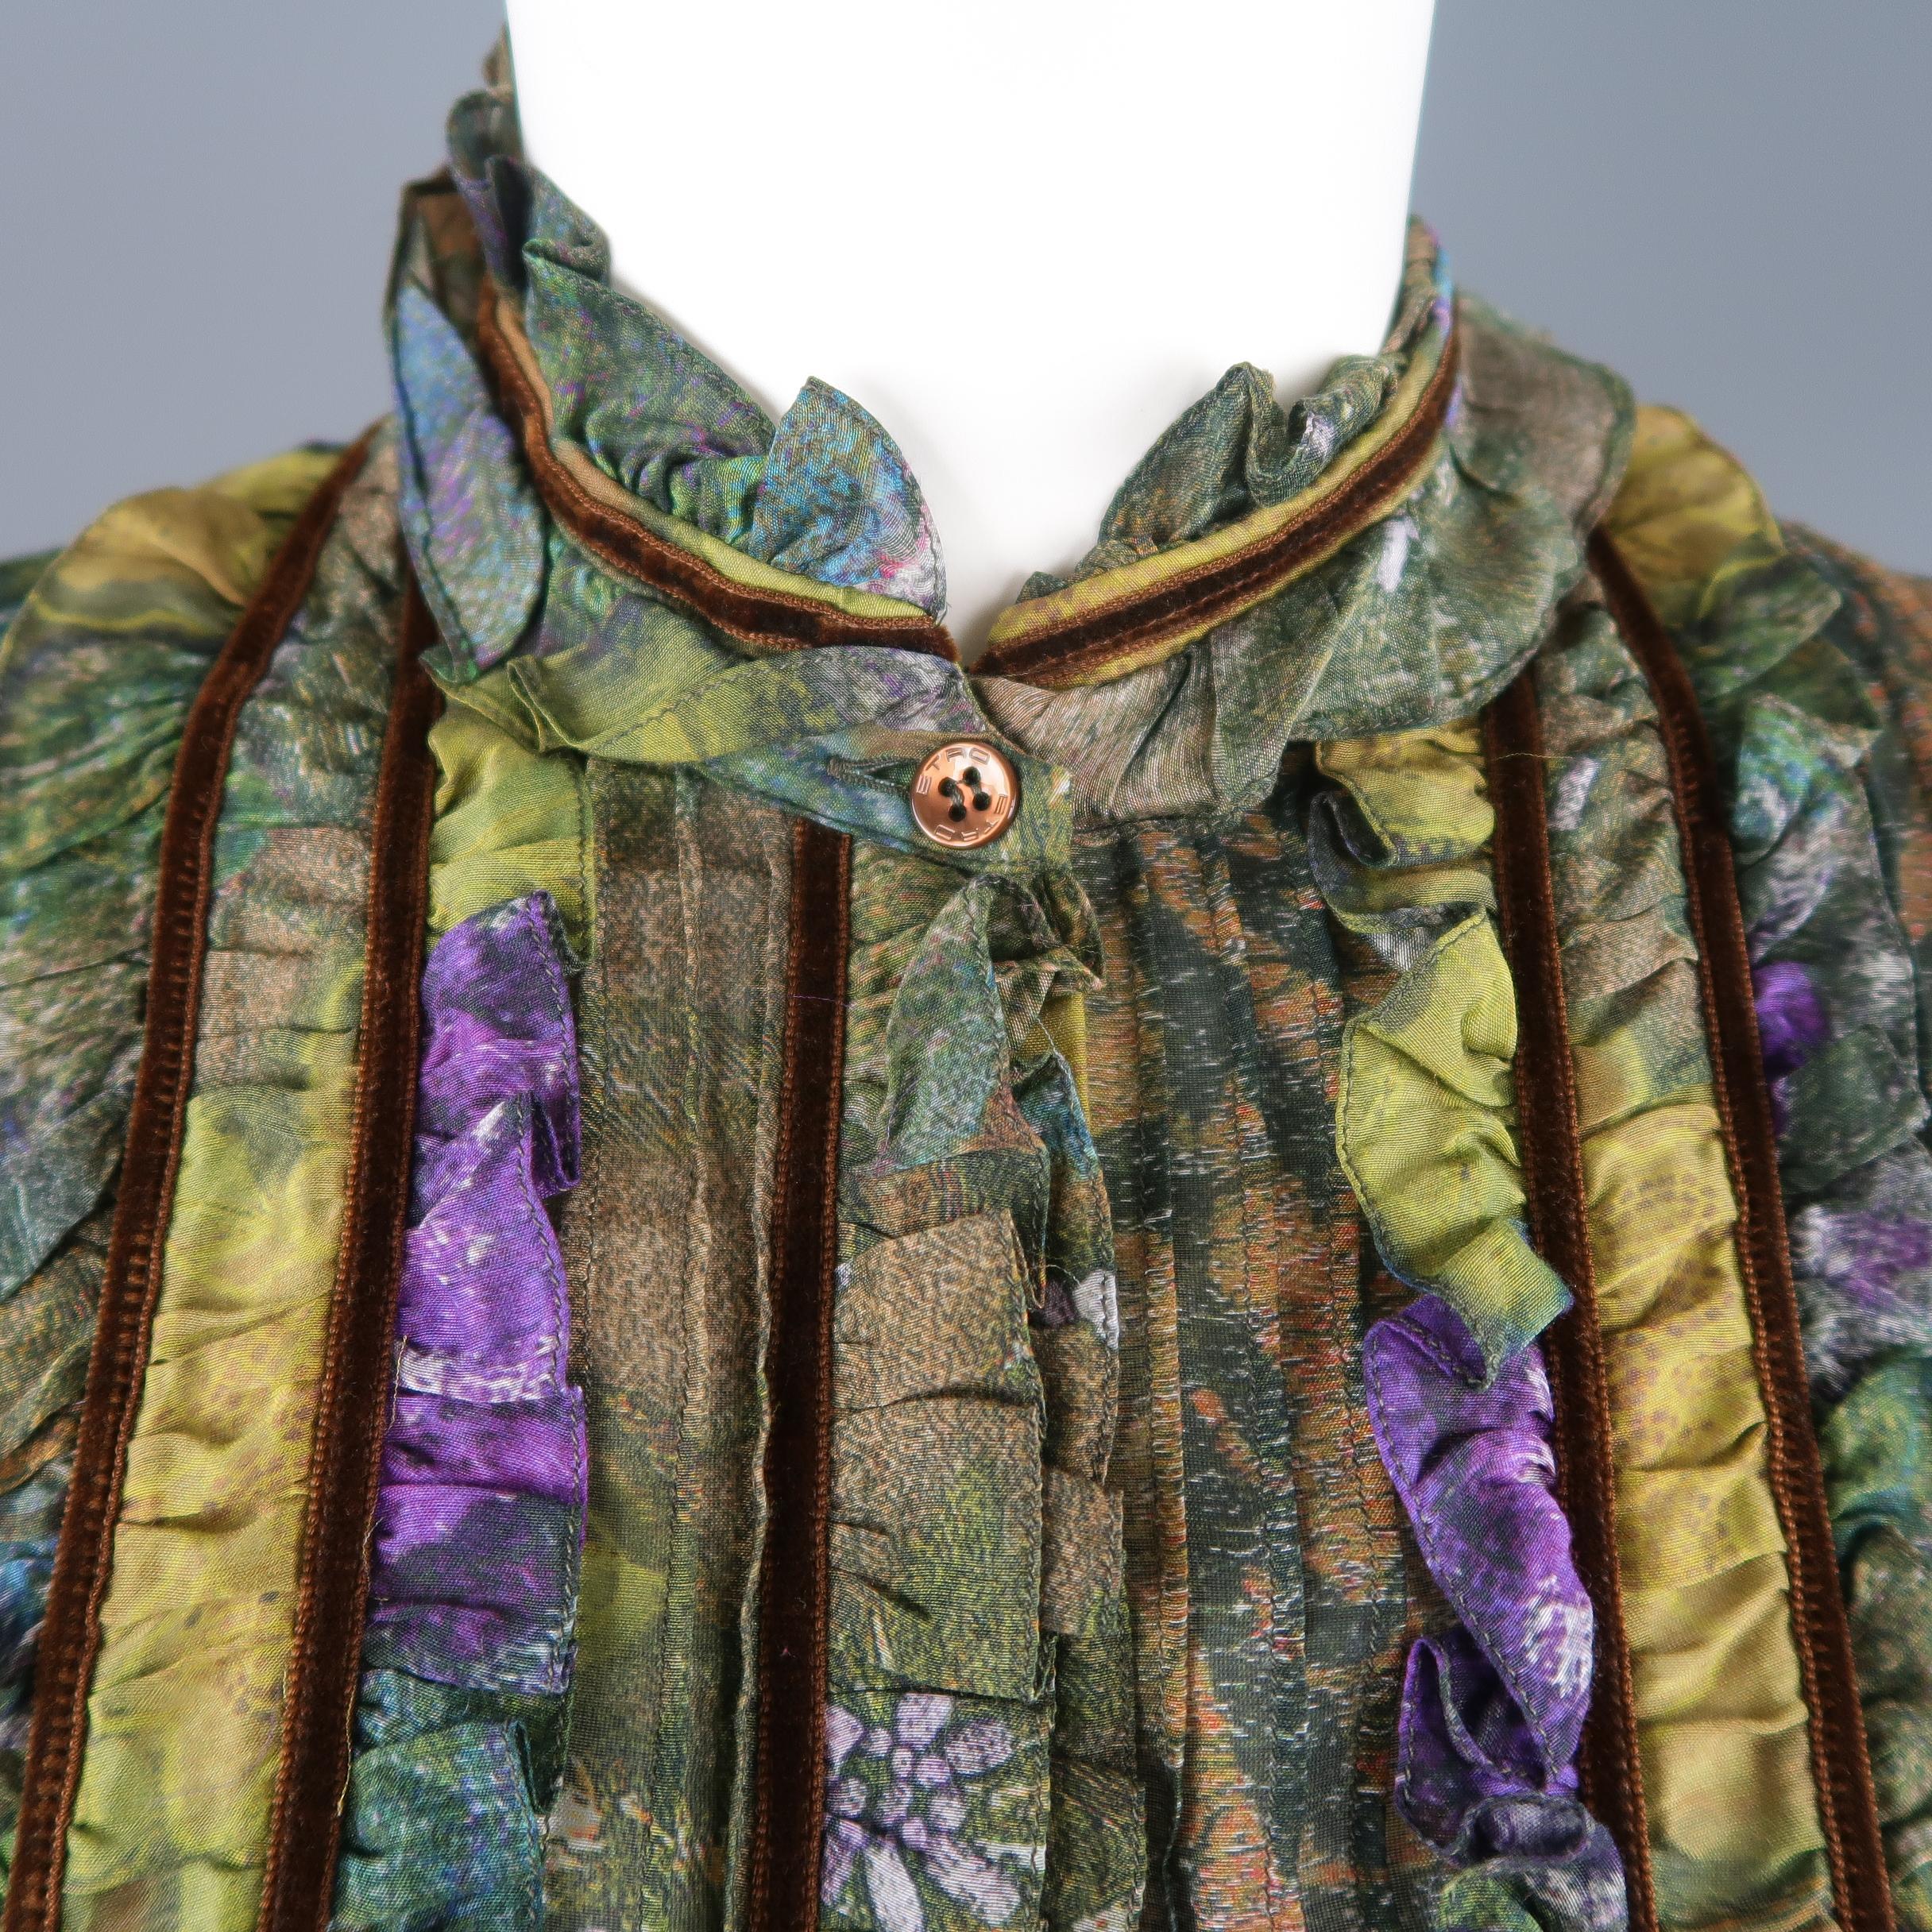 Etro pullover blouse comes in green abstract floral print chiffon with a brown velvet trimmed ruffle bib, pleated trim, and ruffled band collar. Made in Italy.
 
Excellent Pre-Owned Condition.
Marked: IT 40
 
Measurements:
 
Shoulder: 16 in.
Bust: